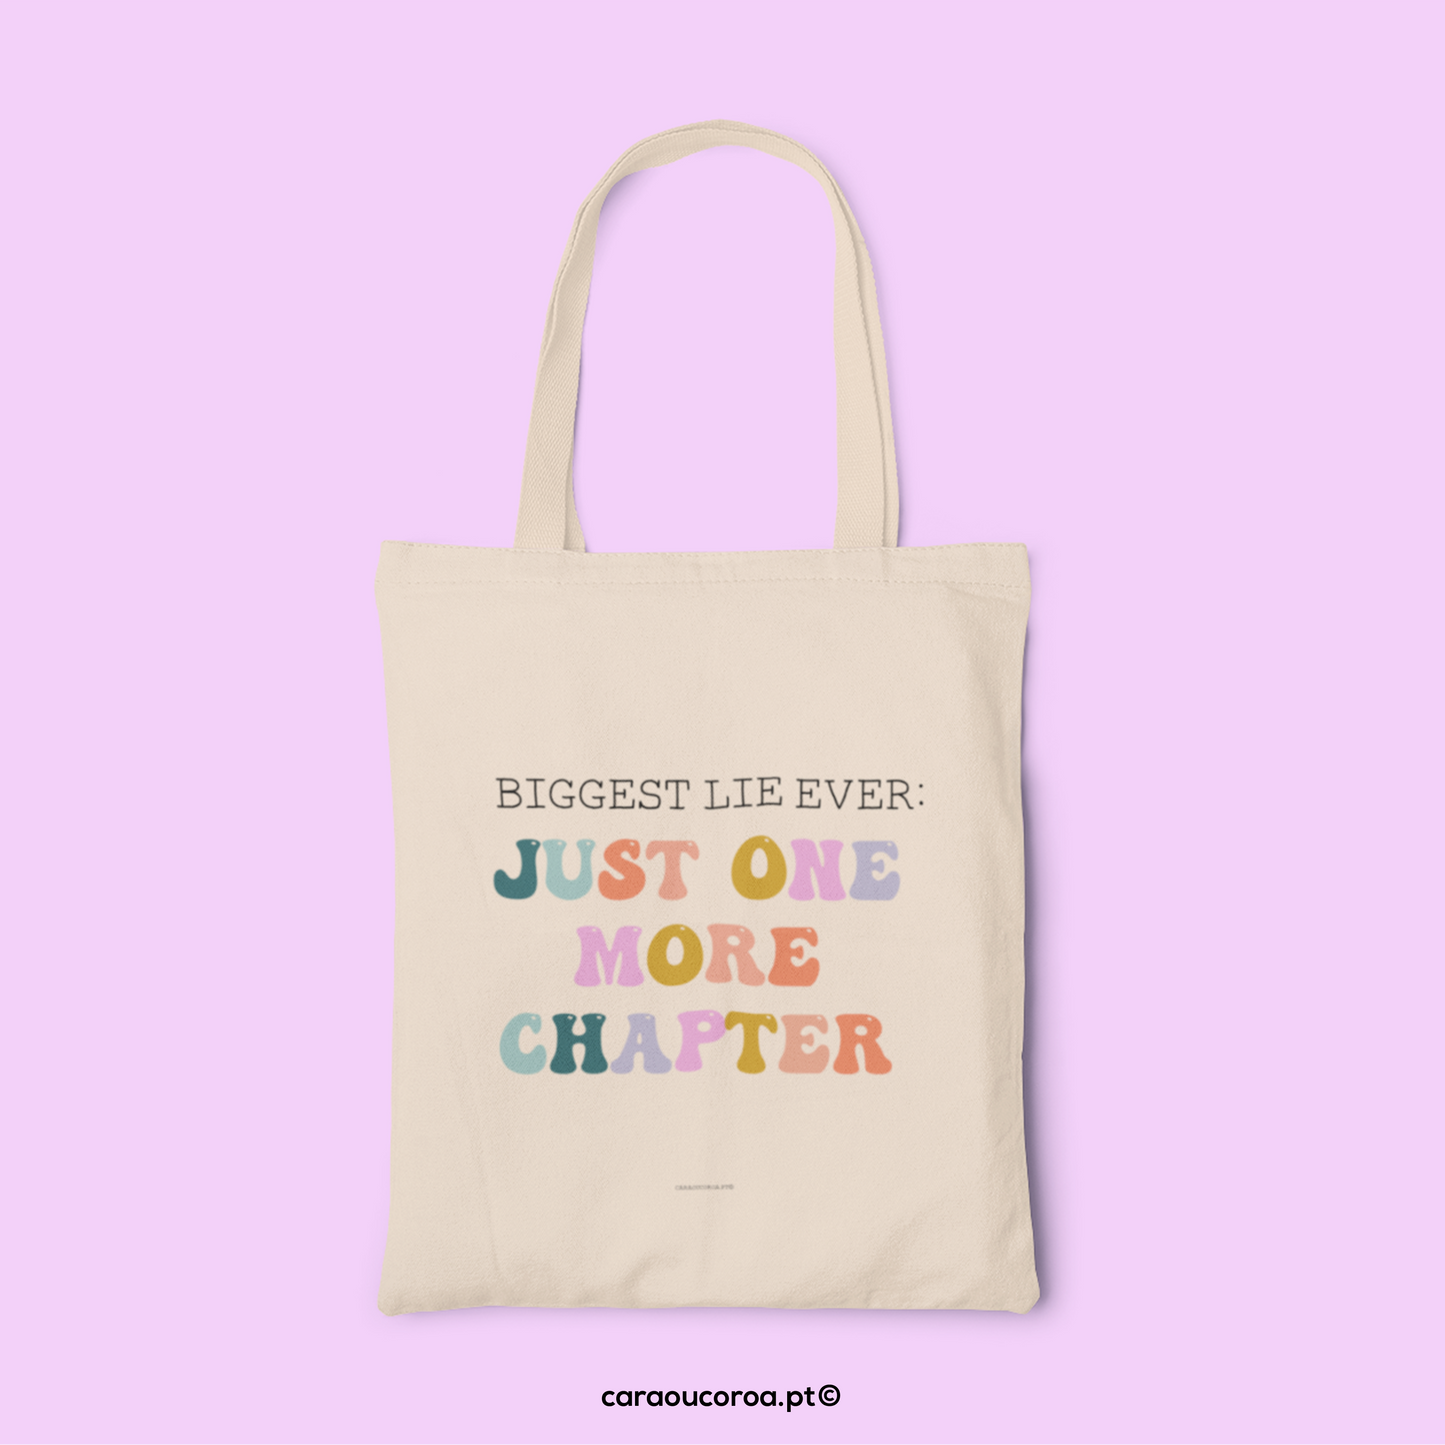 Tote Bag "Just One More Chapter"